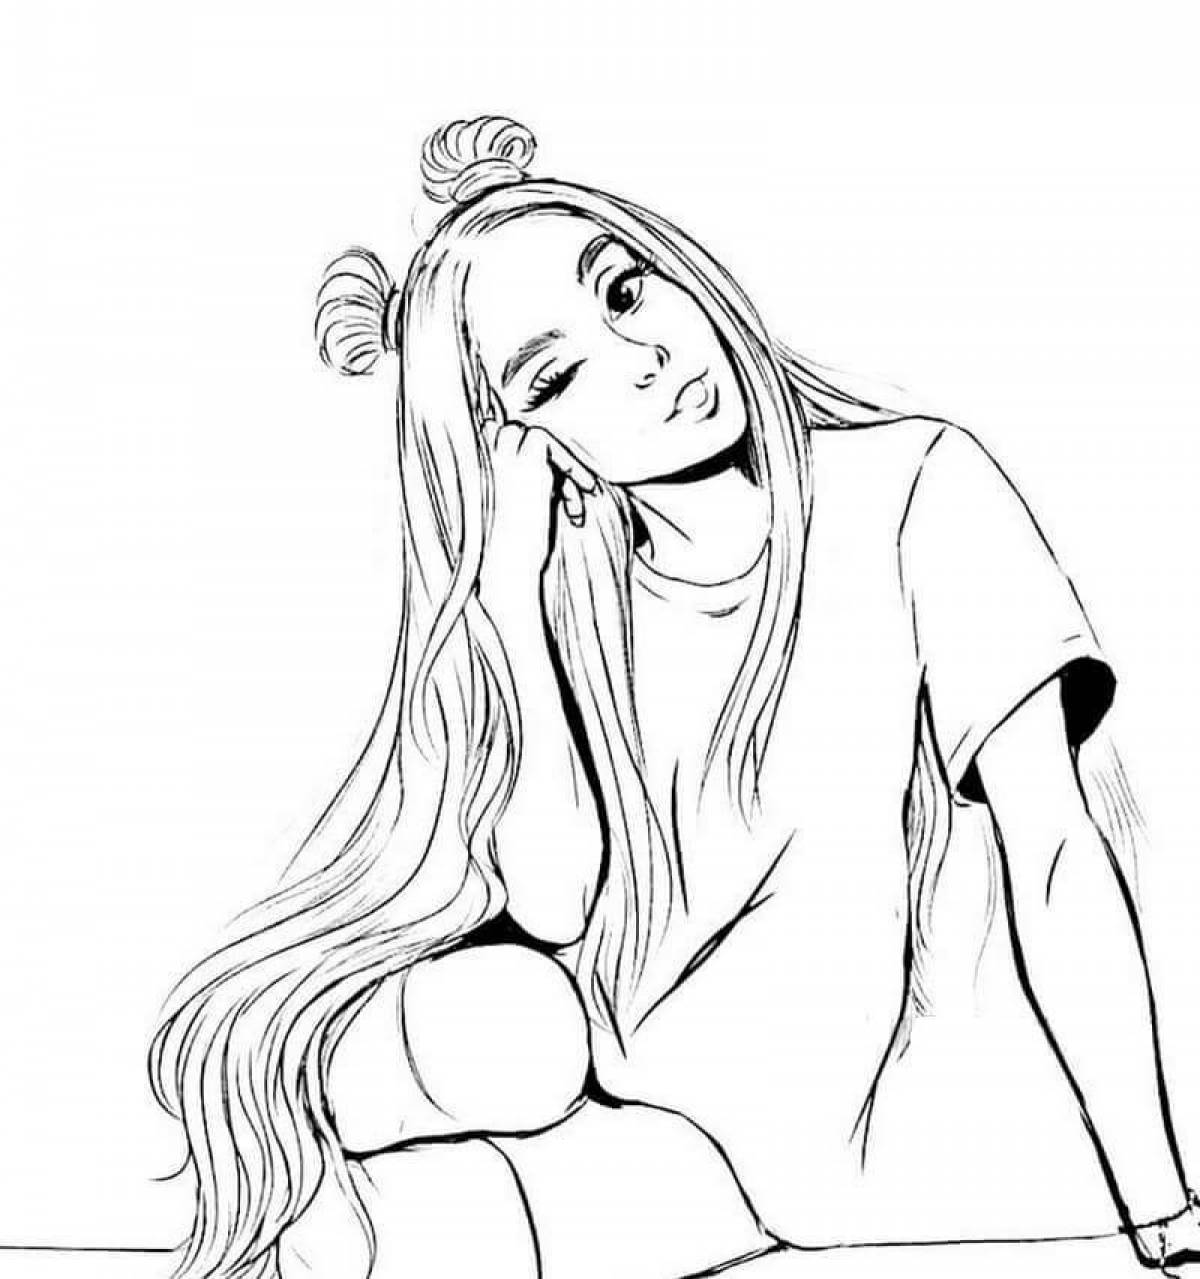 Amazing coloring pages for girls 10 years old